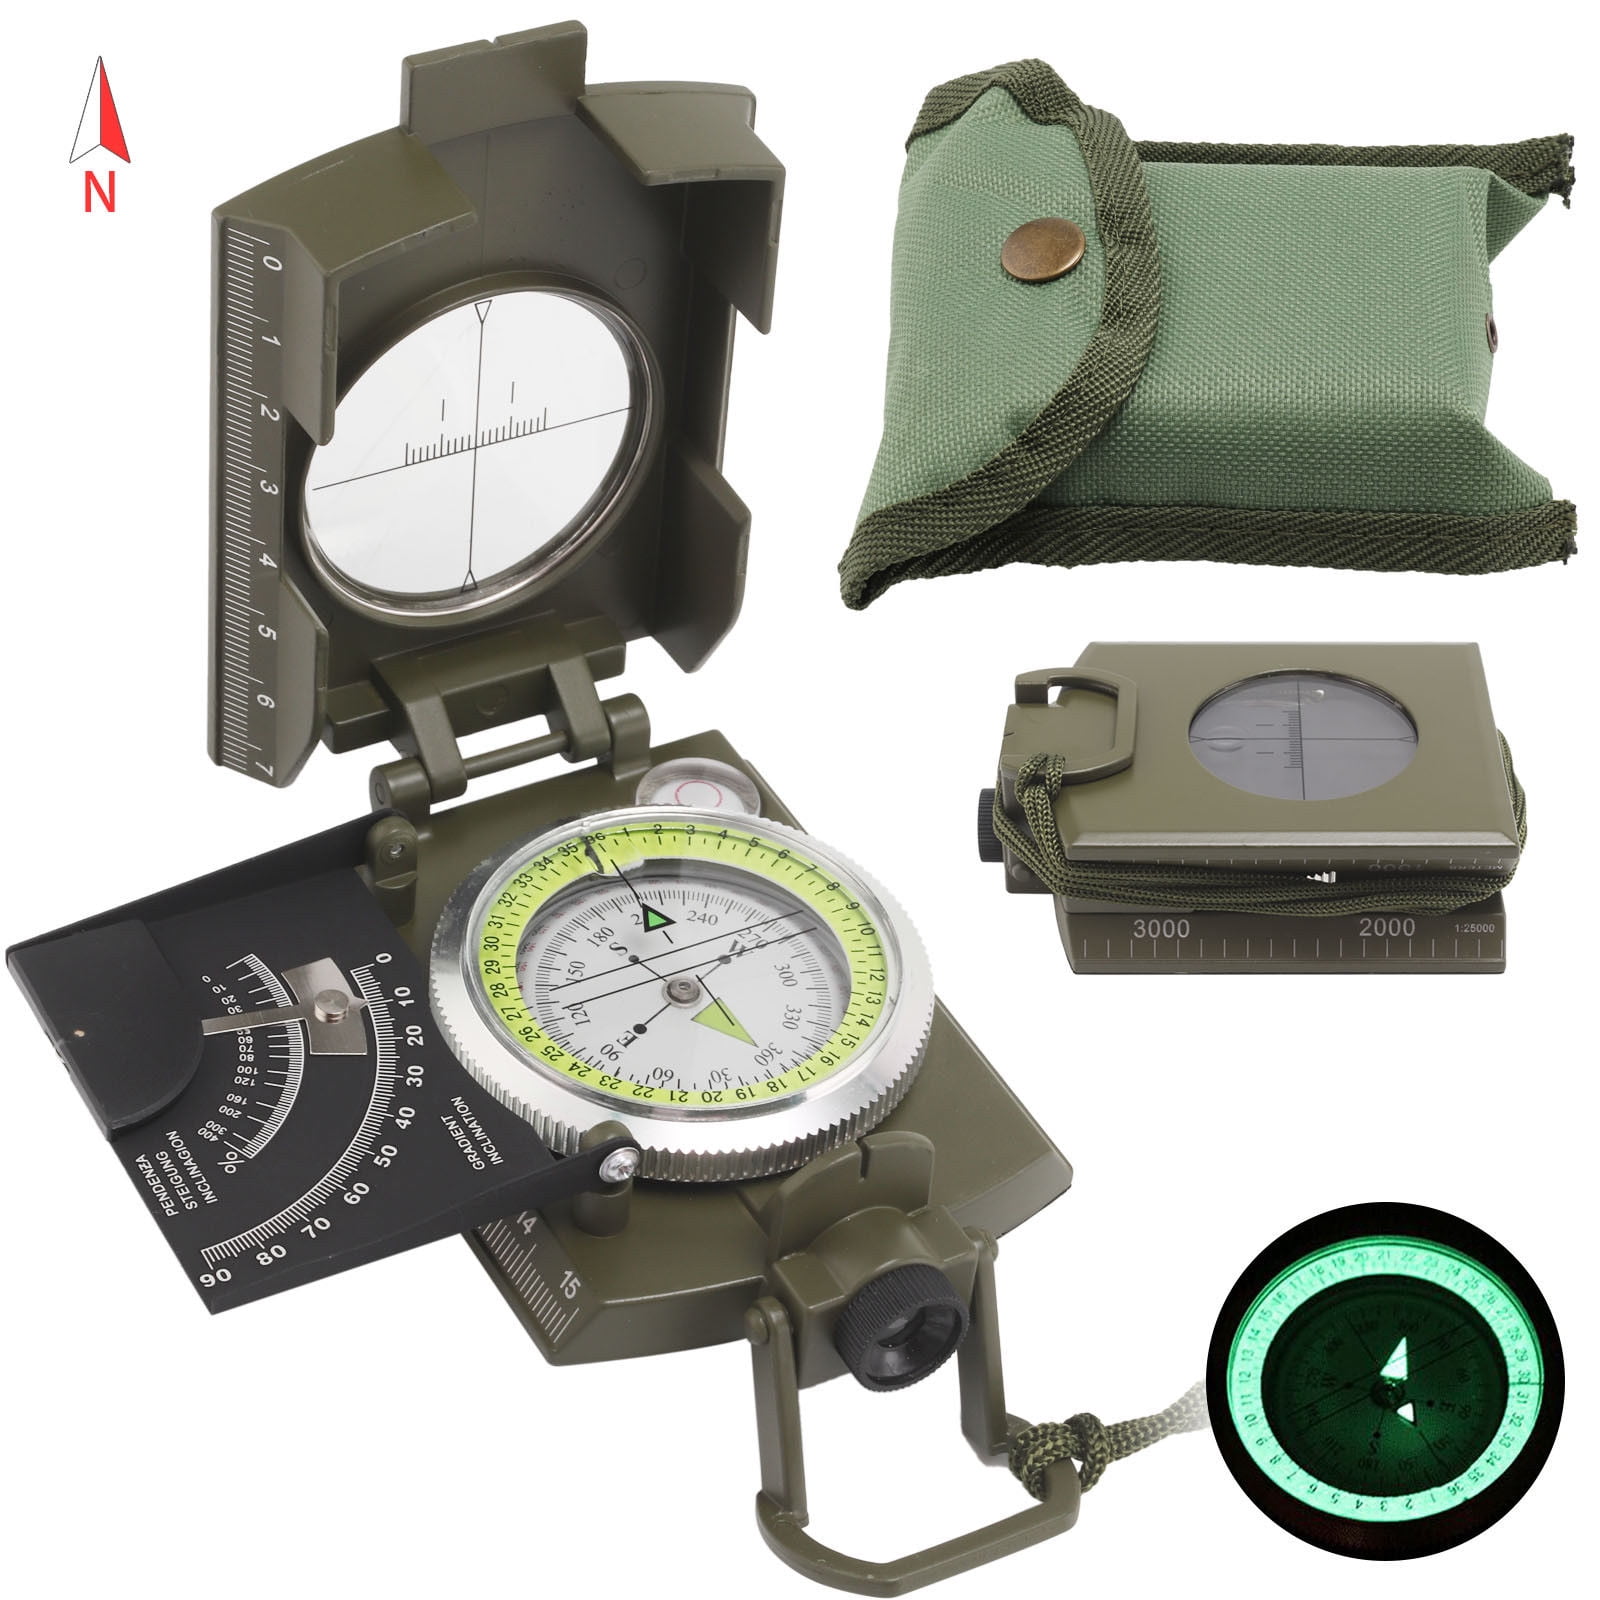 Essential for Hiking Camping Scouting Posinly Compass Resistant & Waterproof Compass with Sighting，Optic 